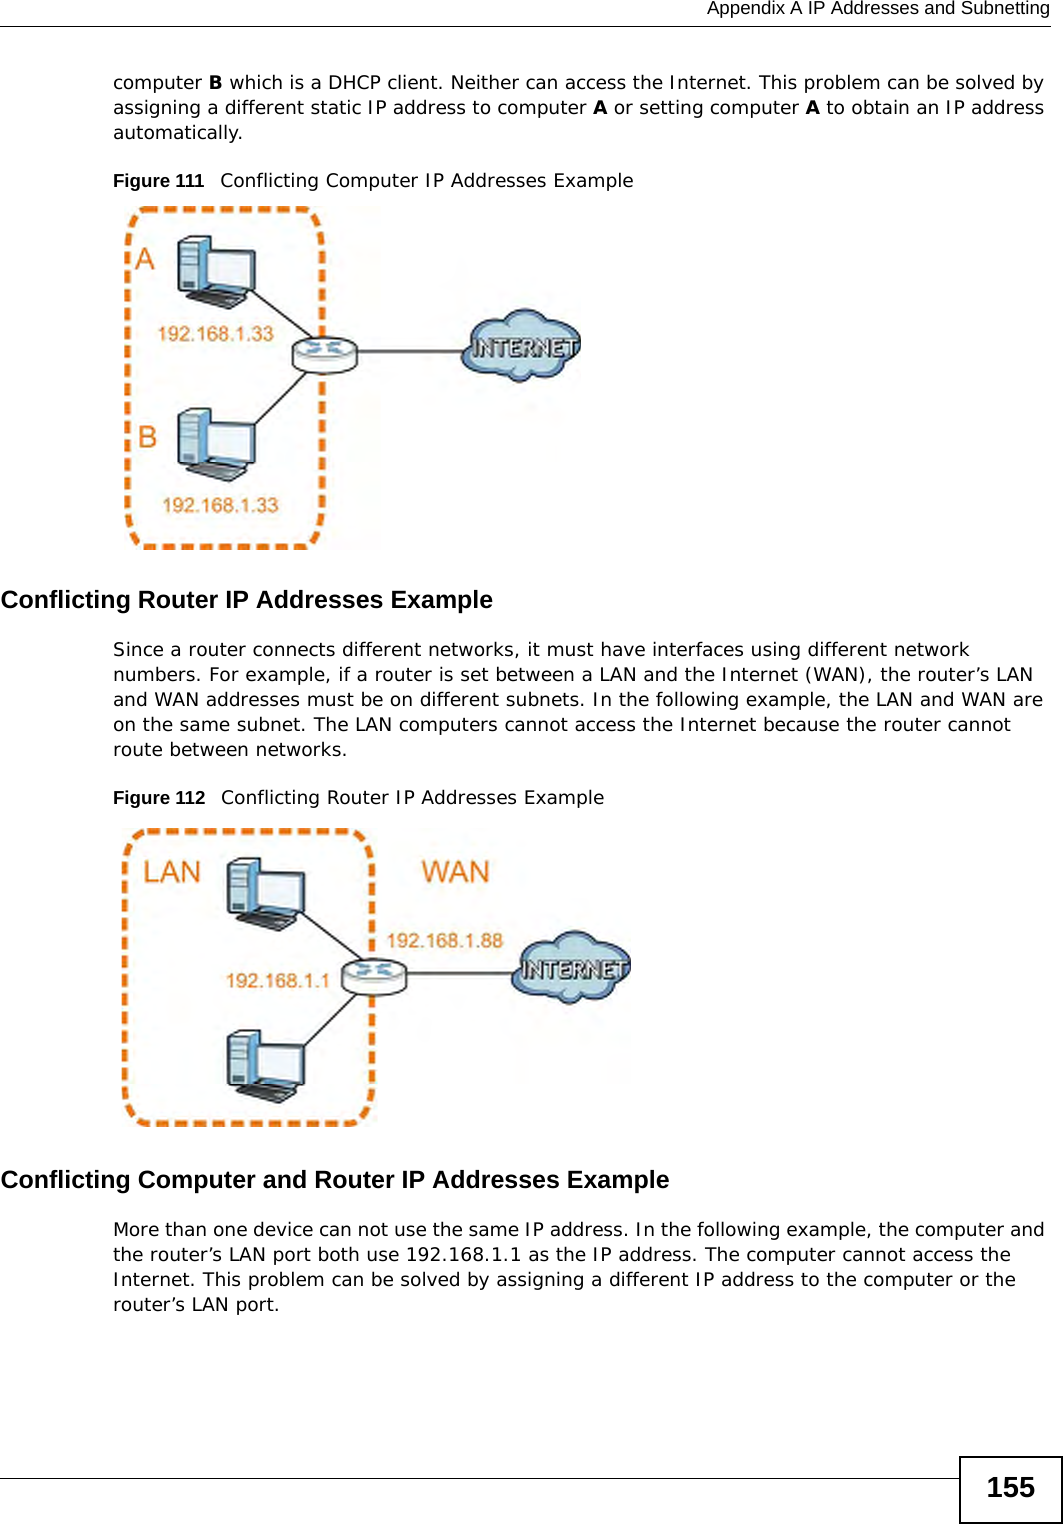  Appendix A IP Addresses and Subnetting155computer B which is a DHCP client. Neither can access the Internet. This problem can be solved by assigning a different static IP address to computer A or setting computer A to obtain an IP address automatically.  Figure 111   Conflicting Computer IP Addresses ExampleConflicting Router IP Addresses ExampleSince a router connects different networks, it must have interfaces using different network numbers. For example, if a router is set between a LAN and the Internet (WAN), the router’s LAN and WAN addresses must be on different subnets. In the following example, the LAN and WAN are on the same subnet. The LAN computers cannot access the Internet because the router cannot route between networks.Figure 112   Conflicting Router IP Addresses ExampleConflicting Computer and Router IP Addresses ExampleMore than one device can not use the same IP address. In the following example, the computer and the router’s LAN port both use 192.168.1.1 as the IP address. The computer cannot access the Internet. This problem can be solved by assigning a different IP address to the computer or the router’s LAN port.  